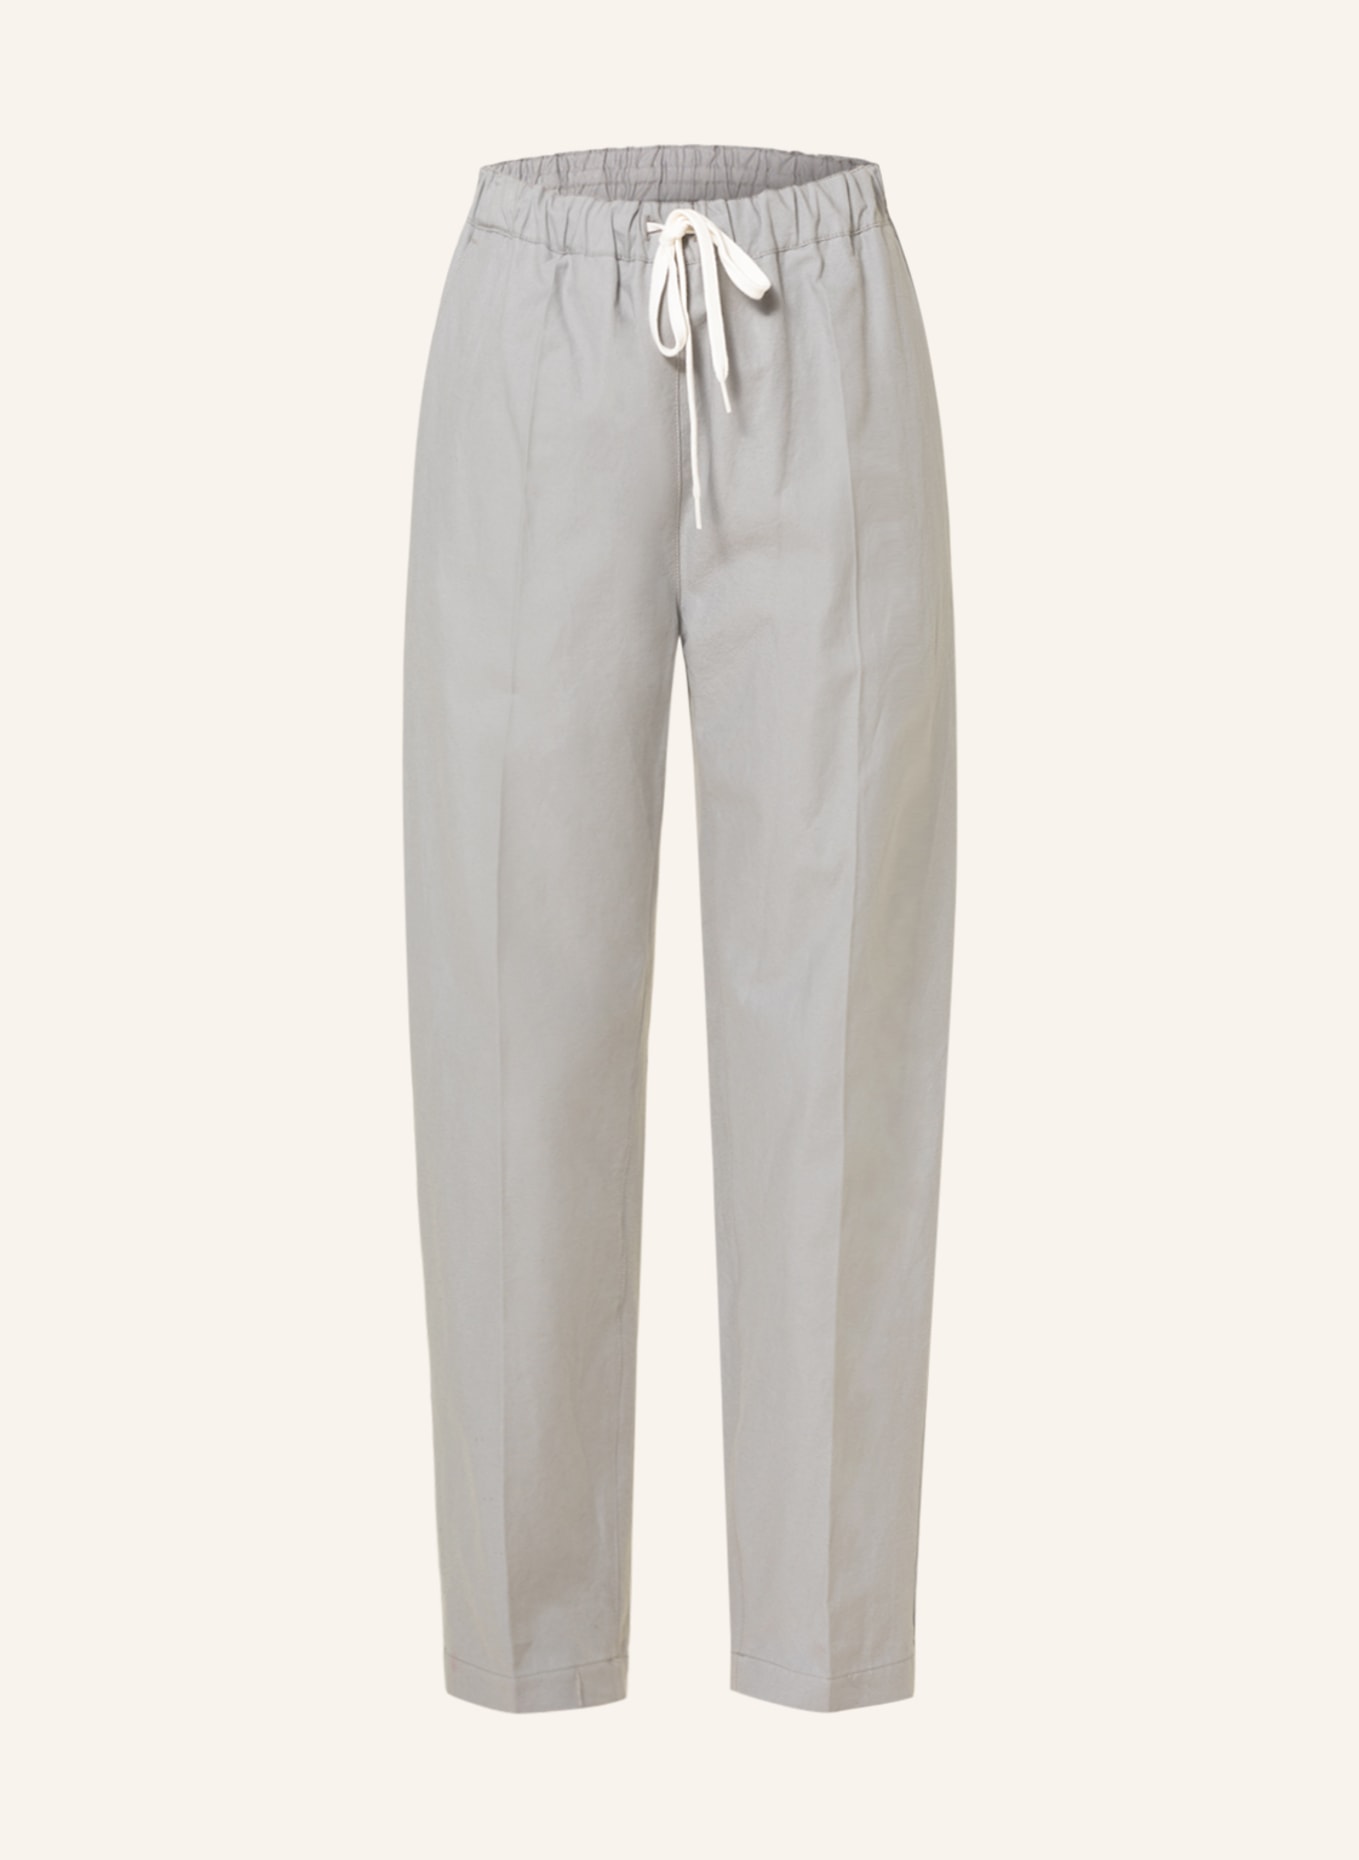 MM6 Maison Margiela Pants in jogger style, Color: LIGHT GRAY (Image 1)